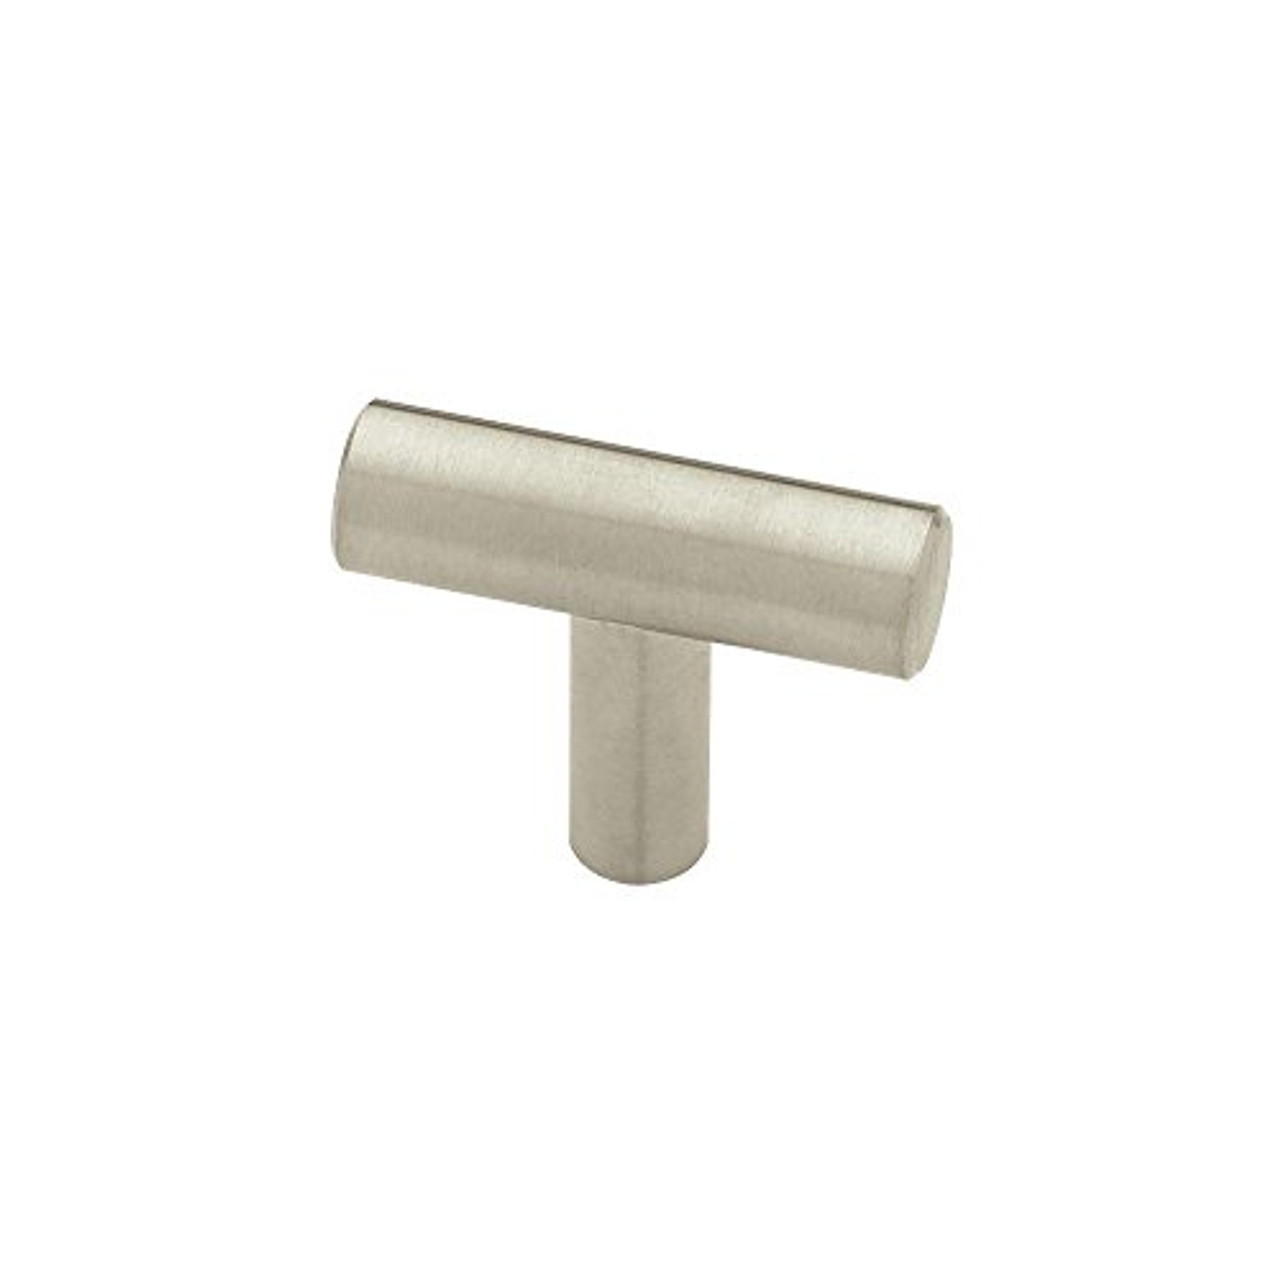 Liberty P02140C-SS-U6 1 1/2" Stainless Steel Bar Cabinet & Drawer Pull 6 Pack